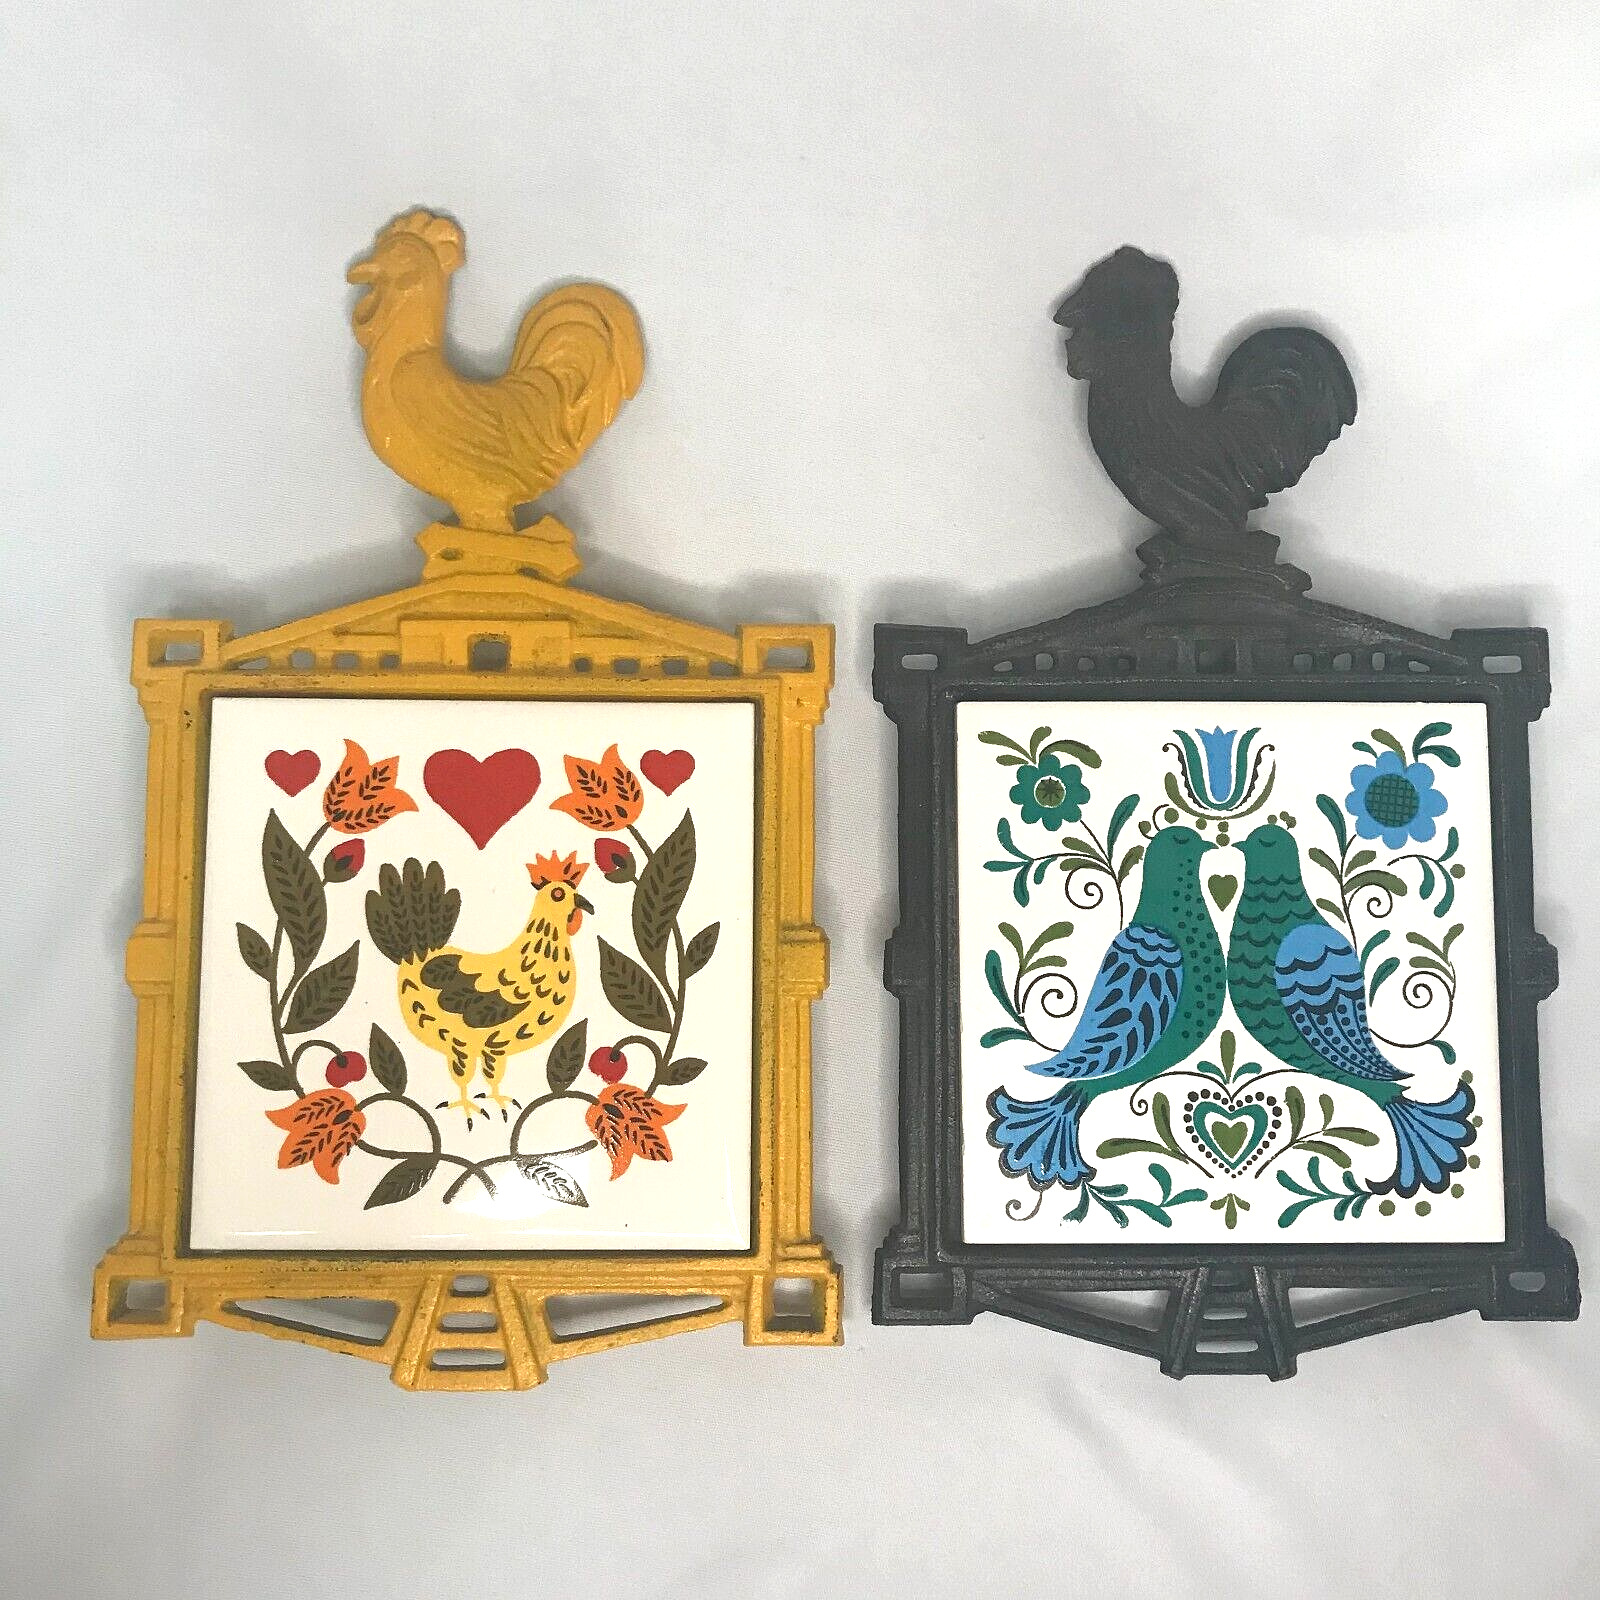 2 Vintage HS Enesco Cast Iron Trivets Wall Hangings - Rooster & Love Birds